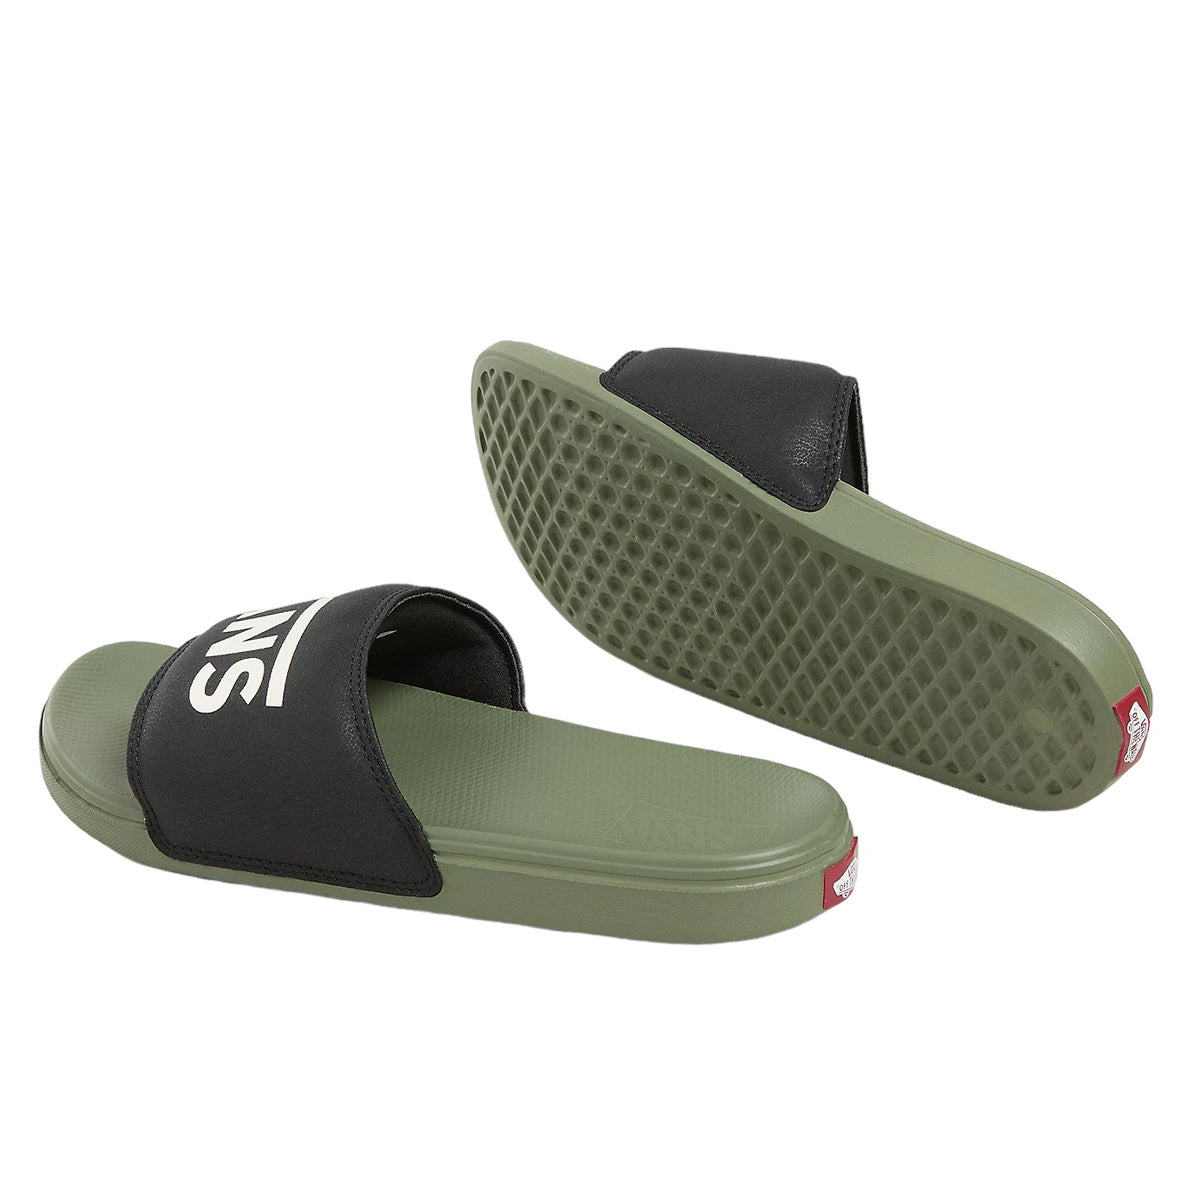 Olive green vans sliders with black strap and white vans logo. Free uk shipping over £50